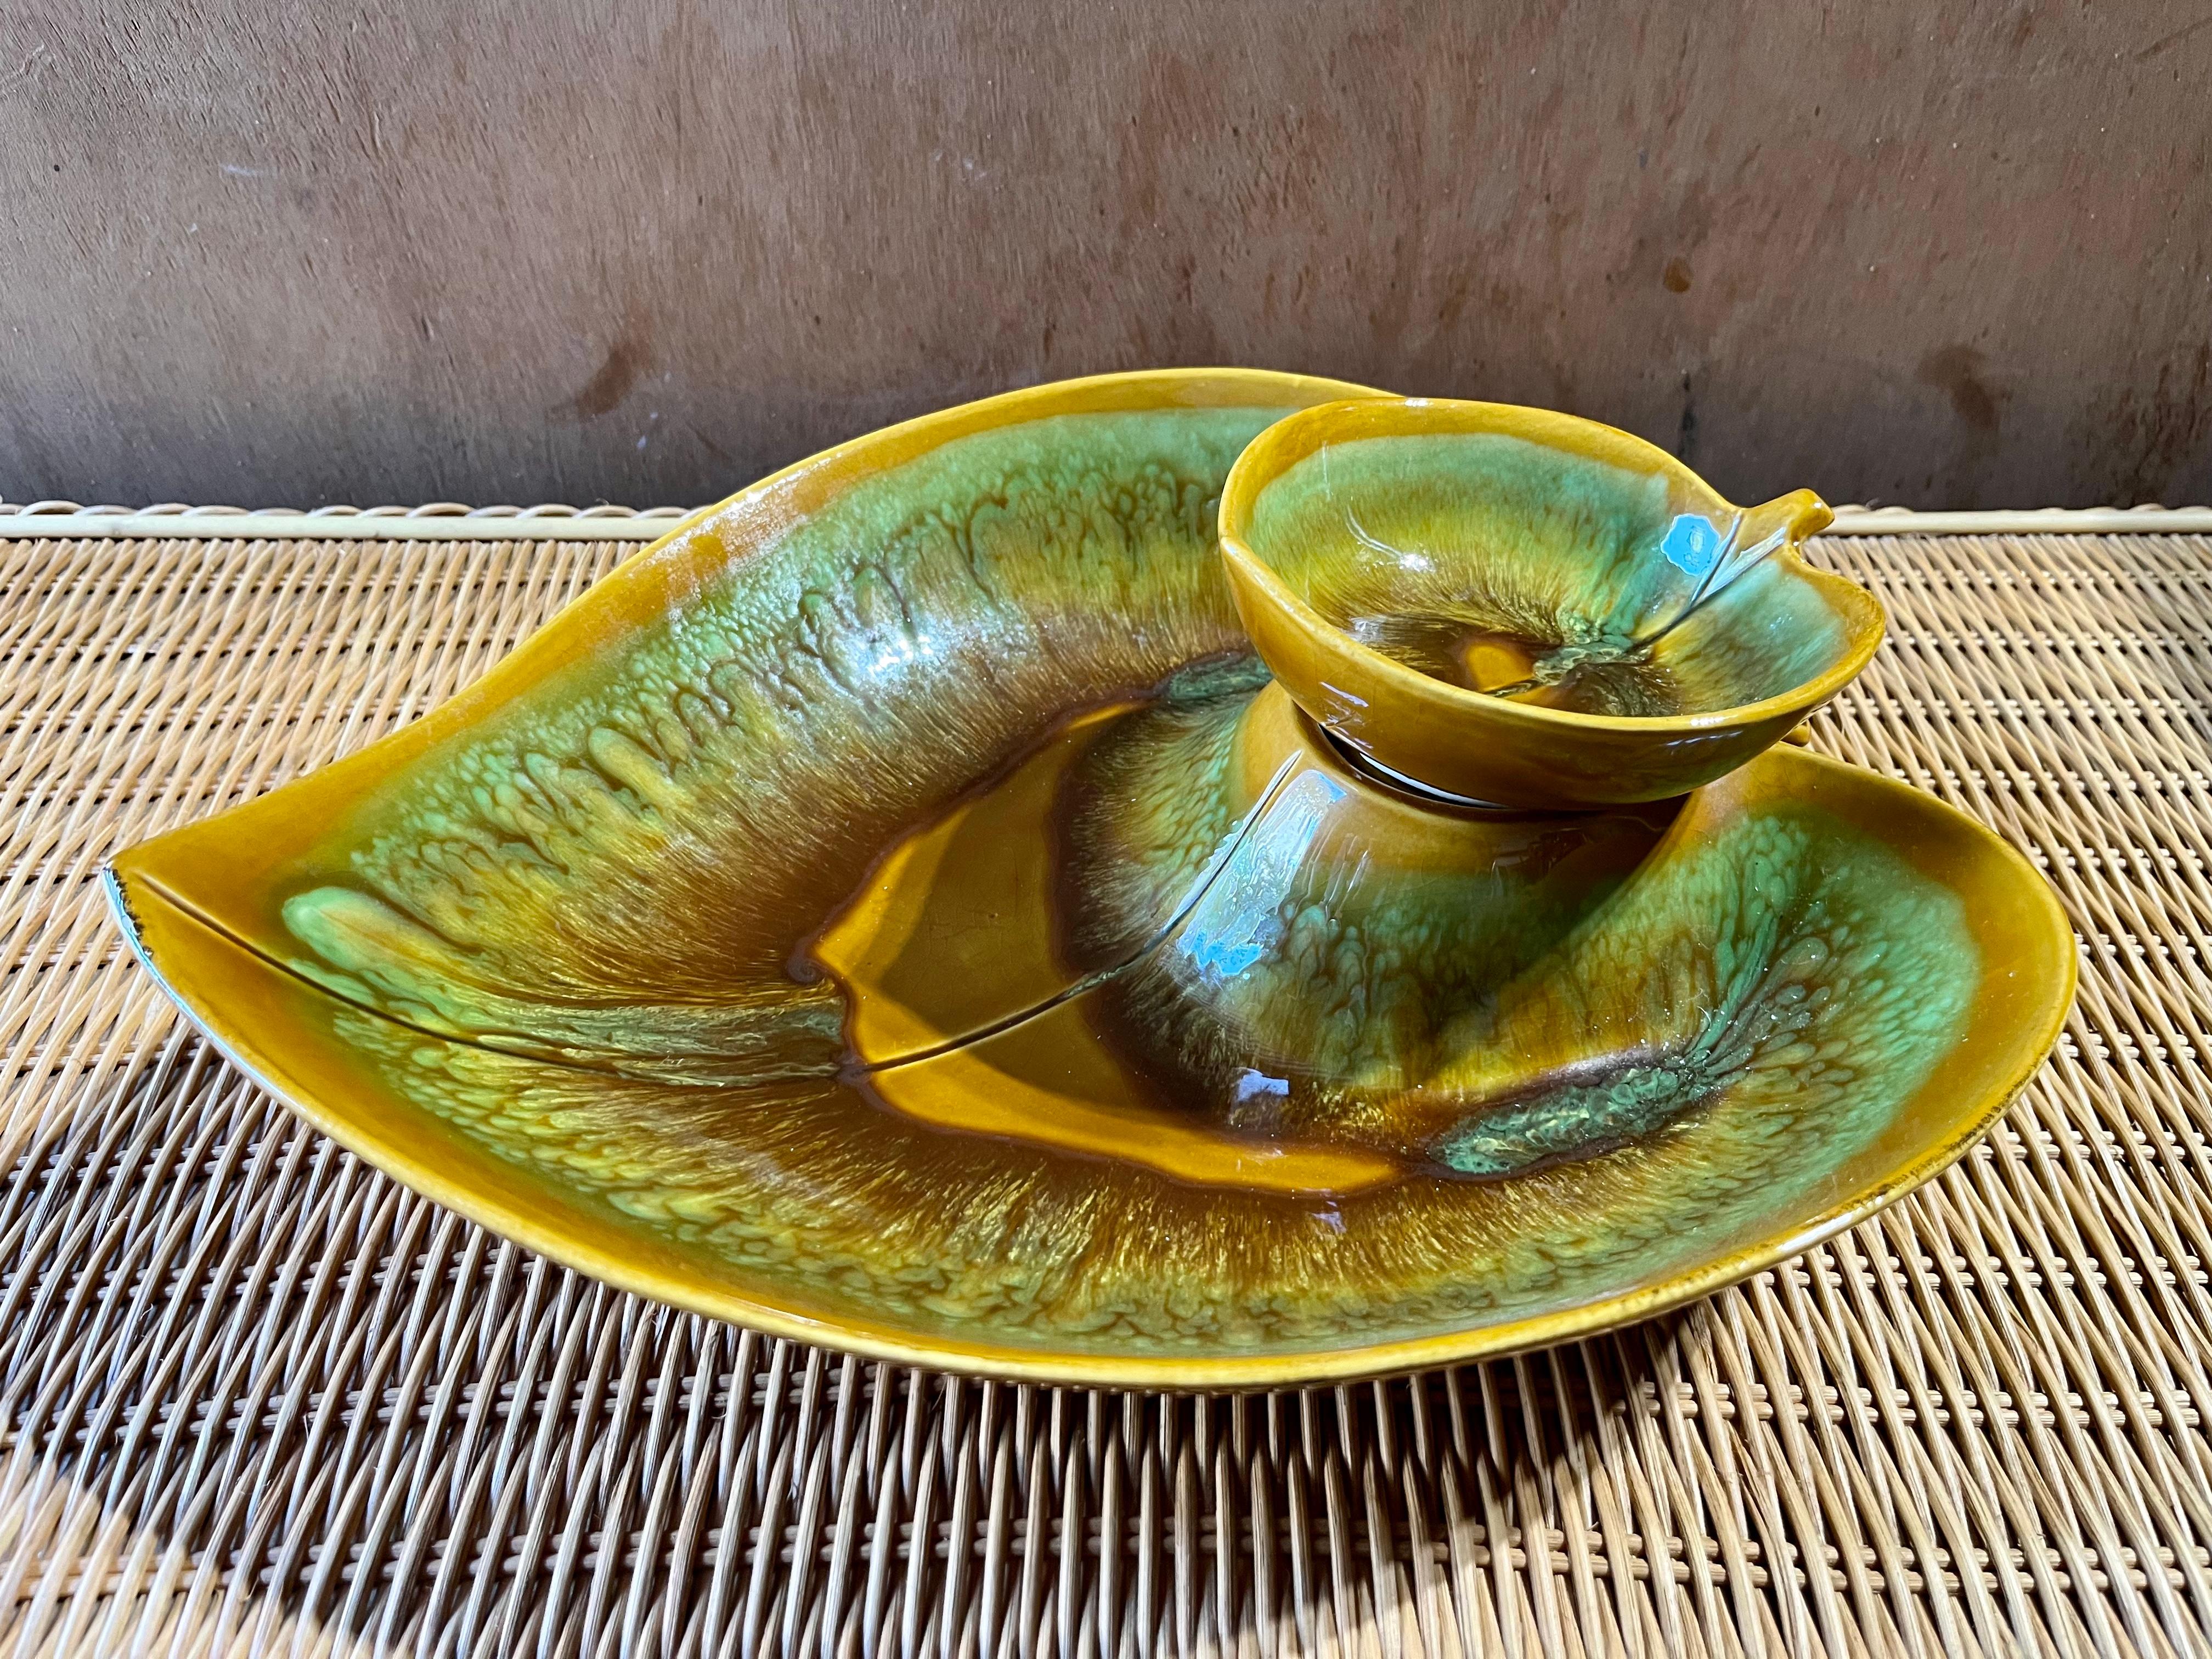 Vintage Mid-Century Modern Chip & Dip Green Leaf Glazed Ceramic Bowl. Circa 1960s
Features a generous Size and a beautiful leaf shape in a avocado green, Teal and brown colors.
In excellent original condition with very minor signs of wear